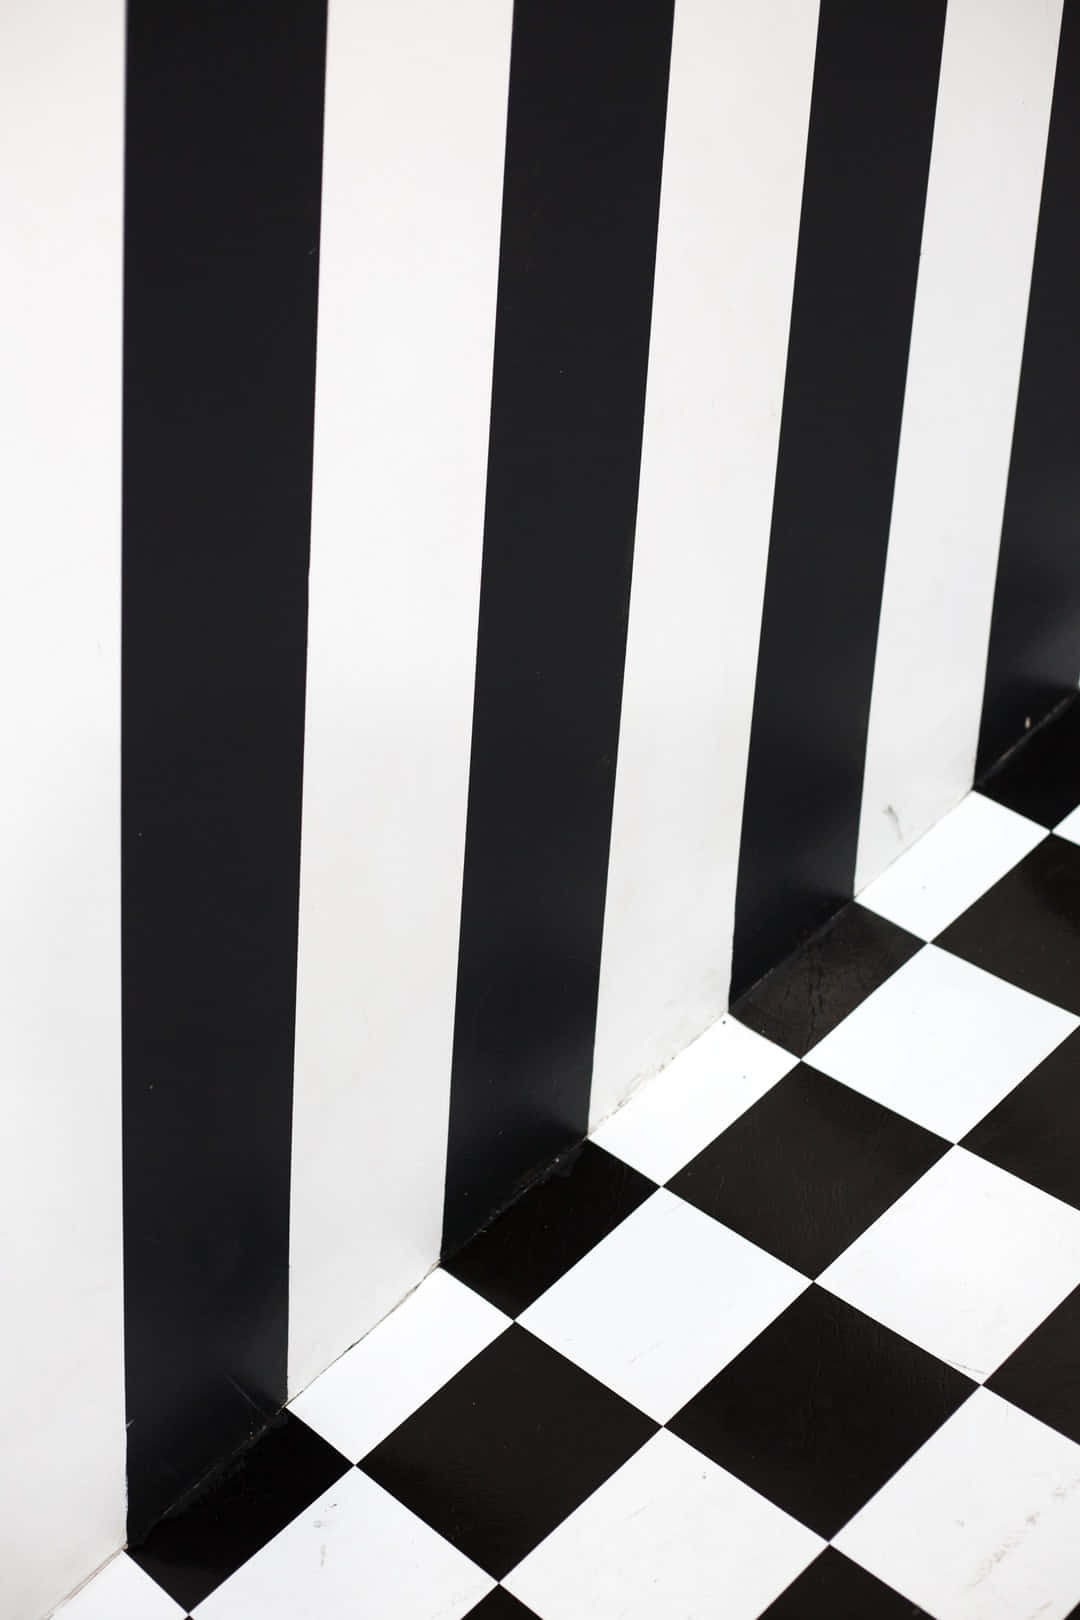 A Black And White Checkered Floor